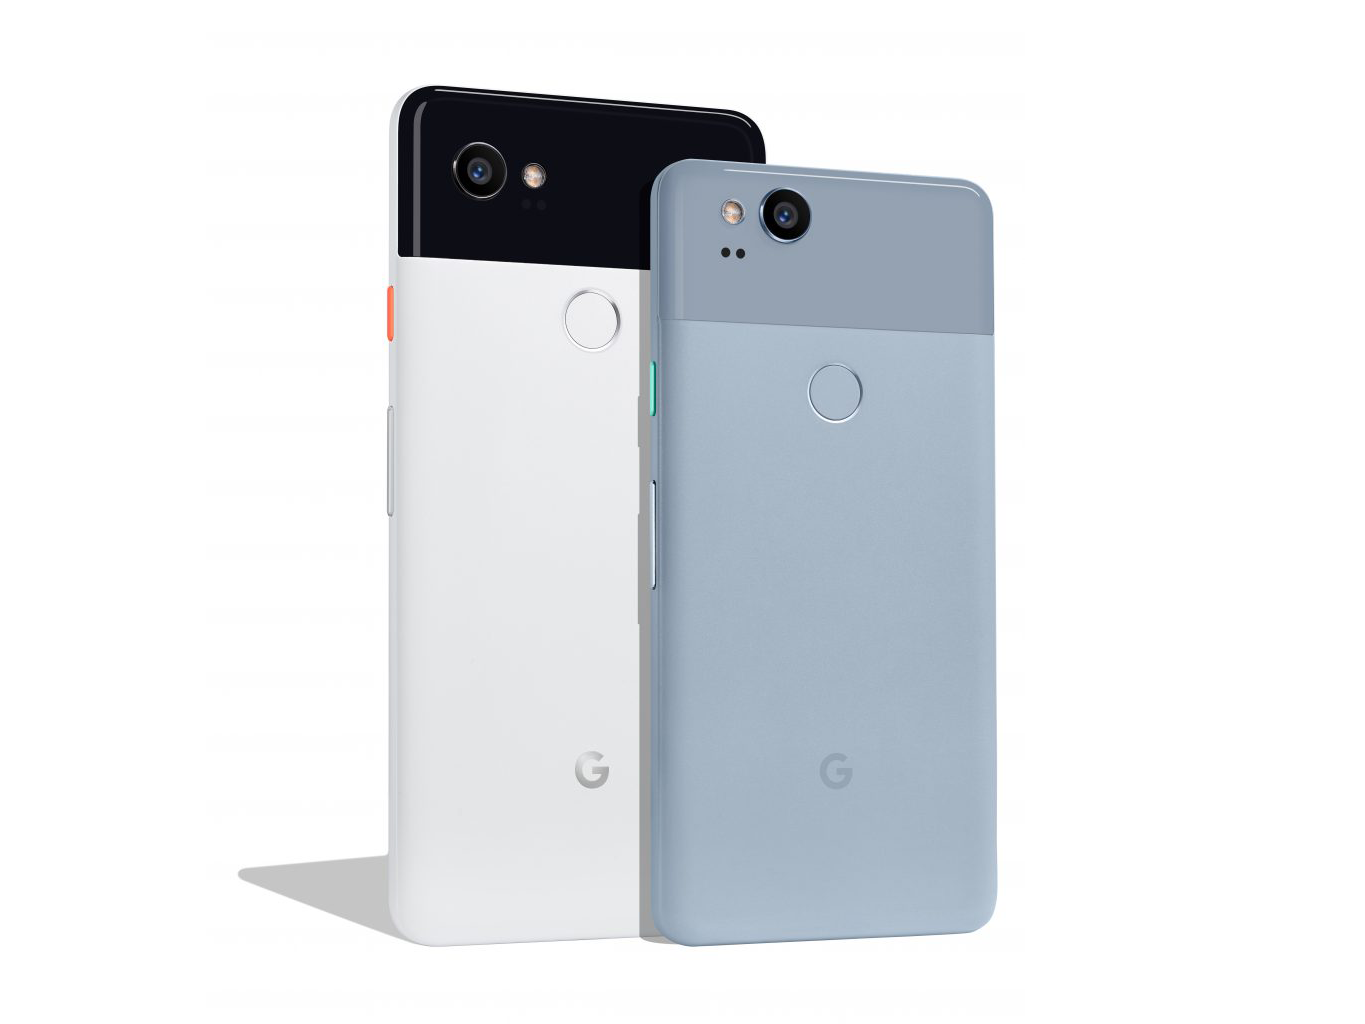 Google Pixel 2 reviewed: Sets new record for overall smartphone camera